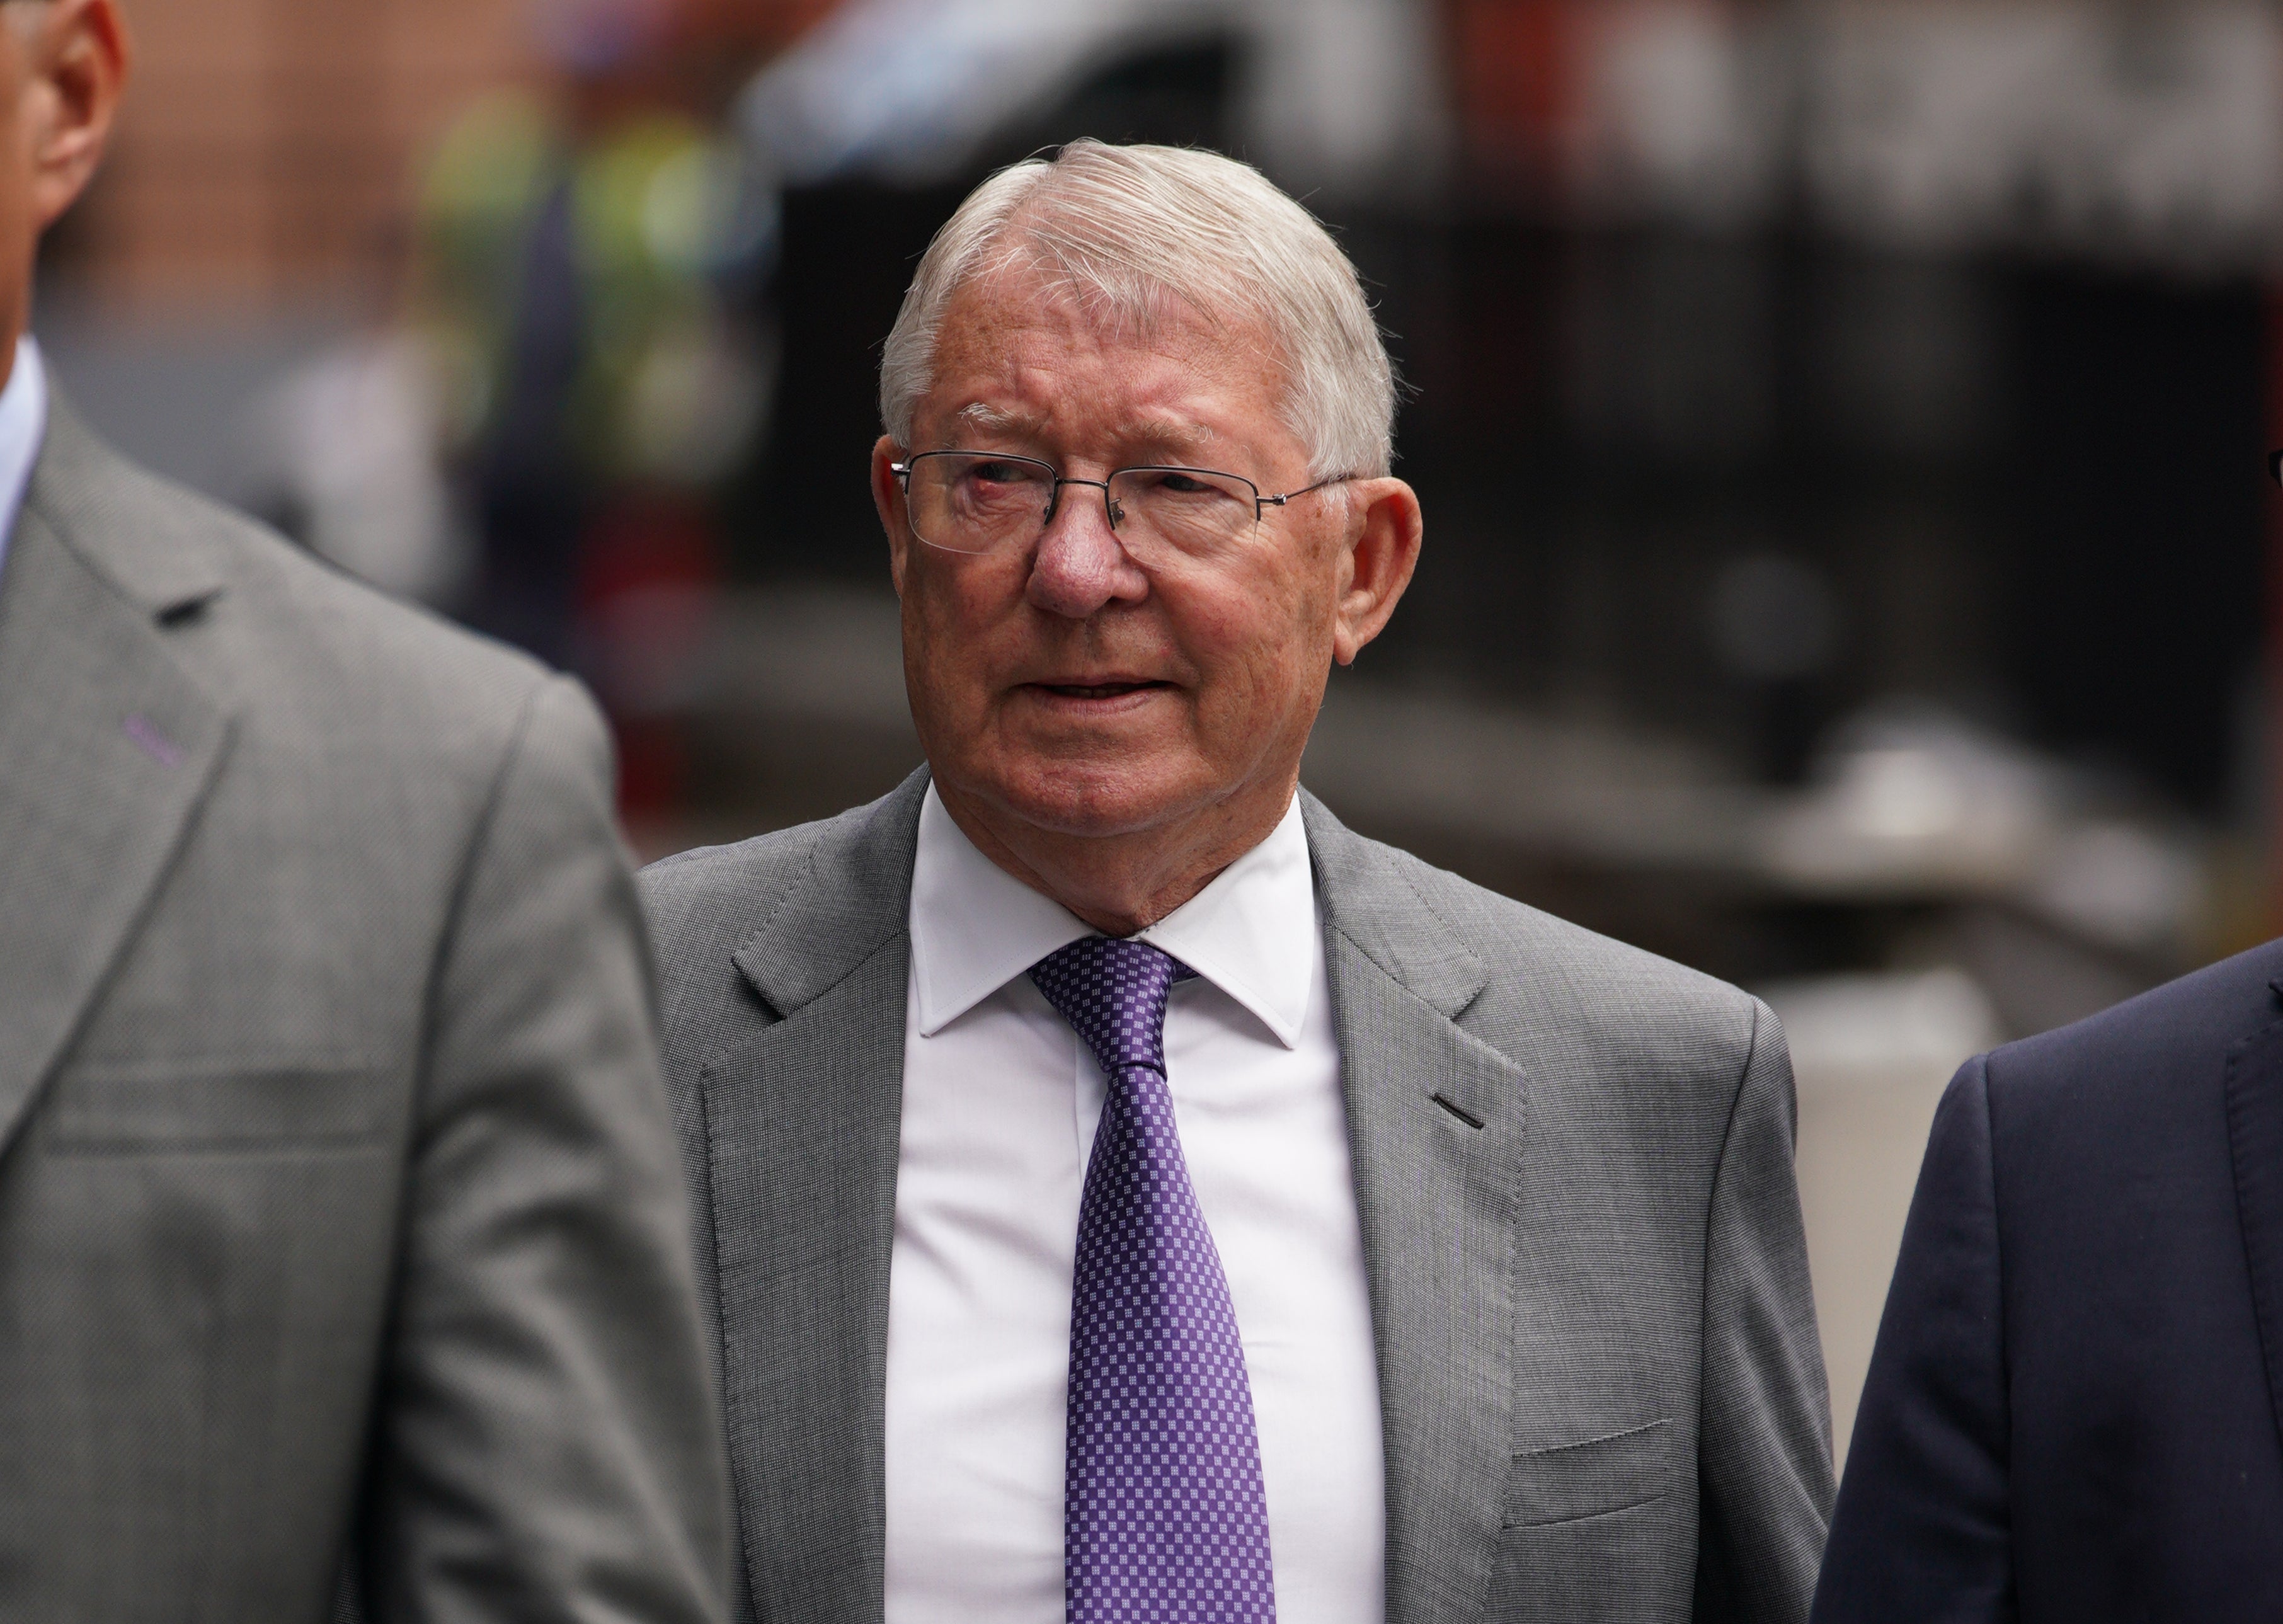 Sir Alex Ferguson arriving at Manchester Crown Court to give evidence in the trial of Ryan Giggs (PA)